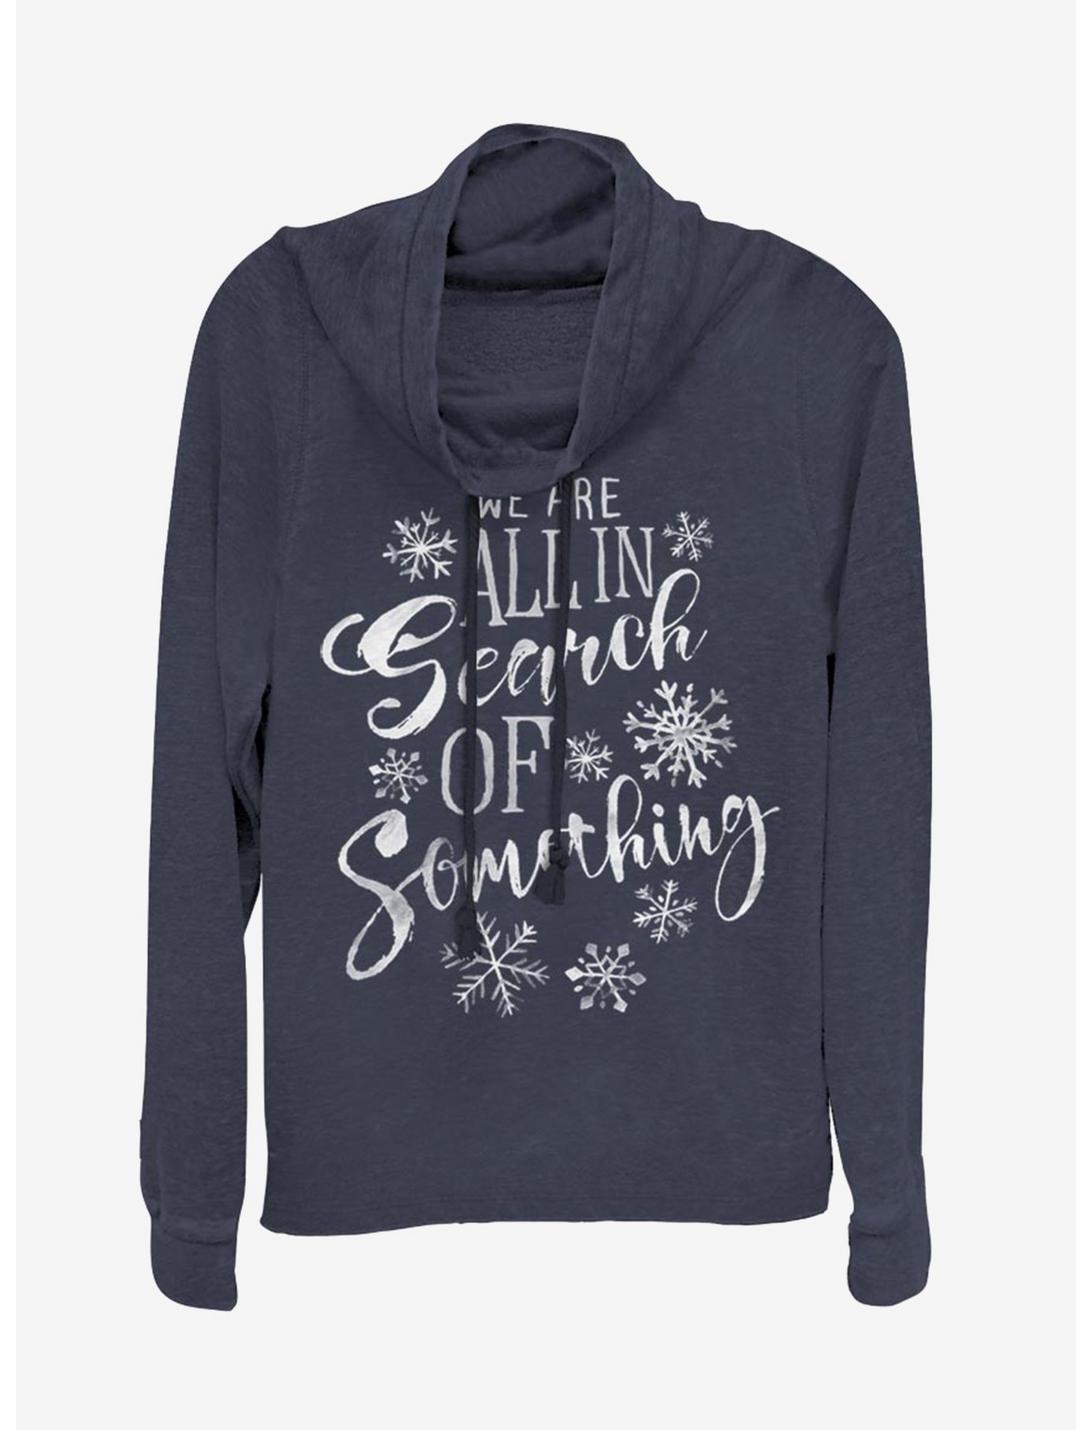 Disney Frozen 2 In Search Of Something Cowlneck Long-Sleeve Womens Top, NAVY, hi-res